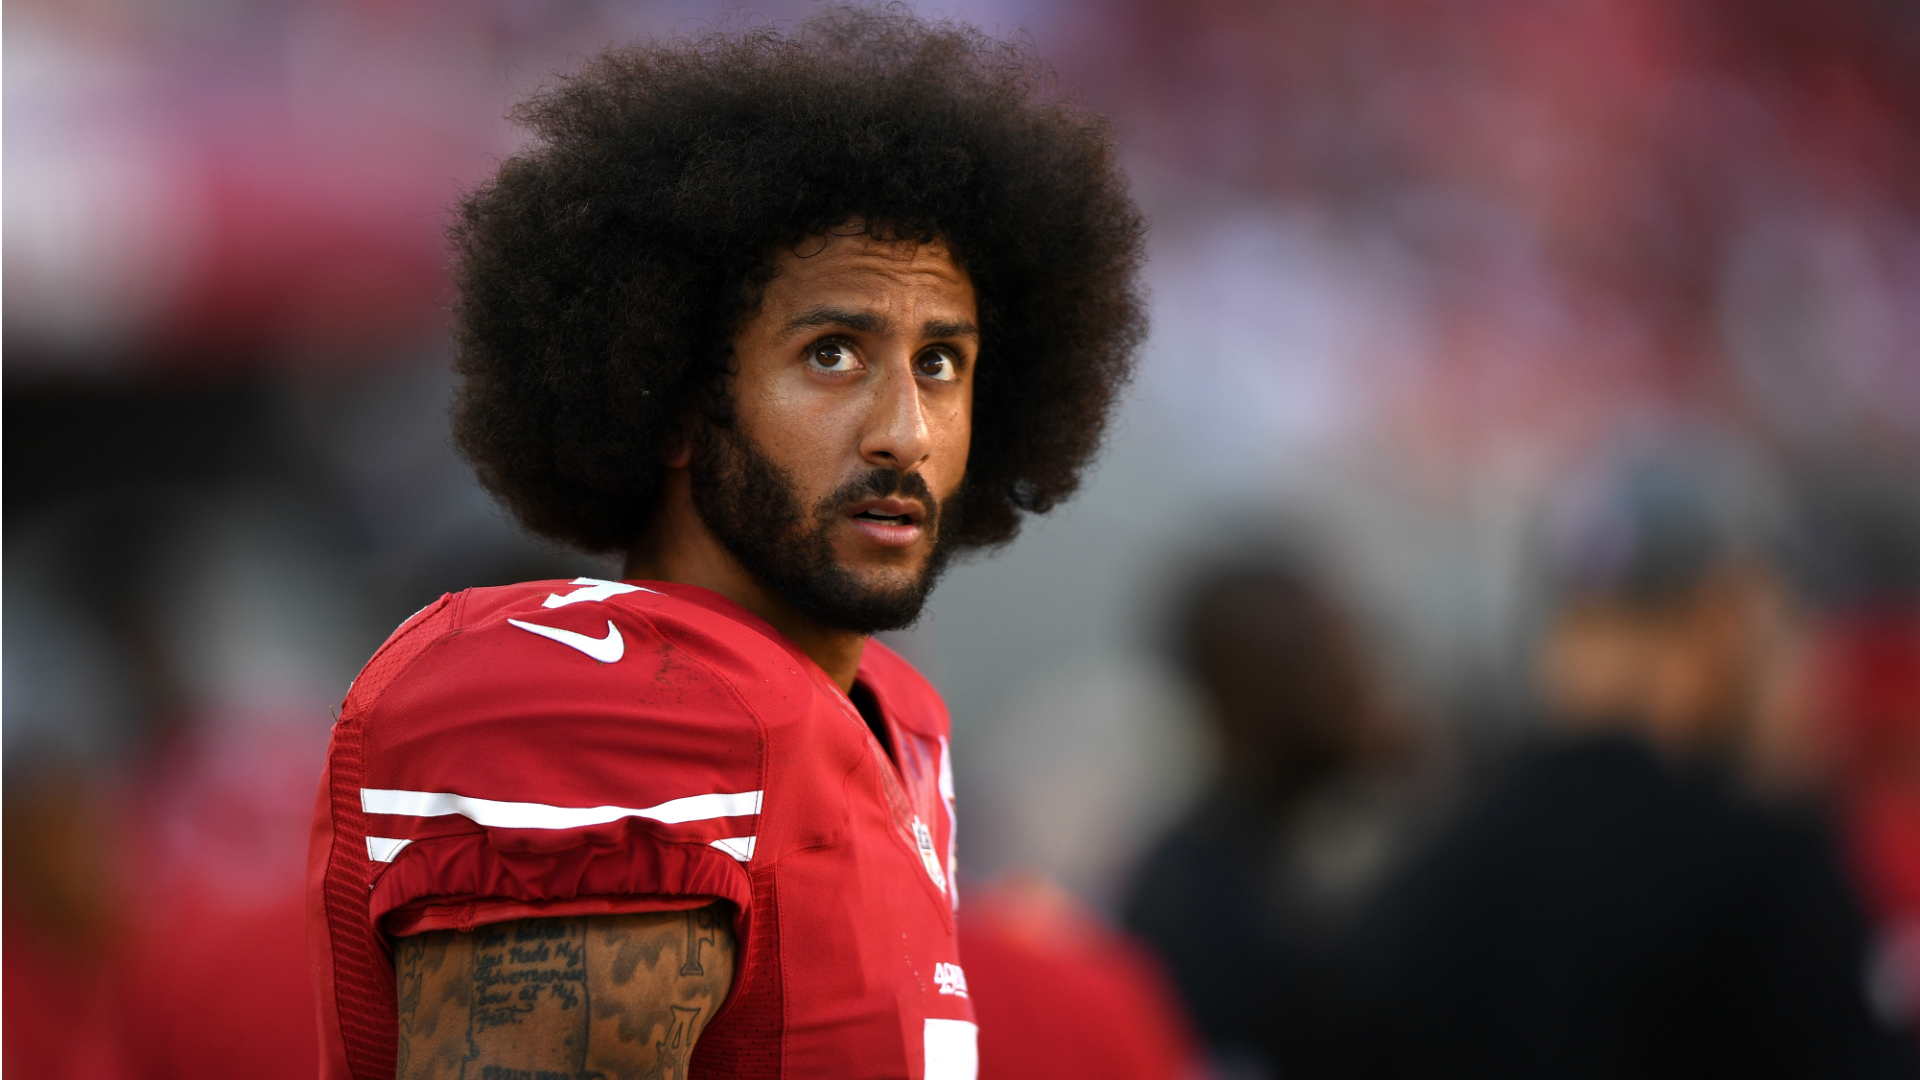 Colin Kaepernick confirms he will stand for national anthem if signed, report says